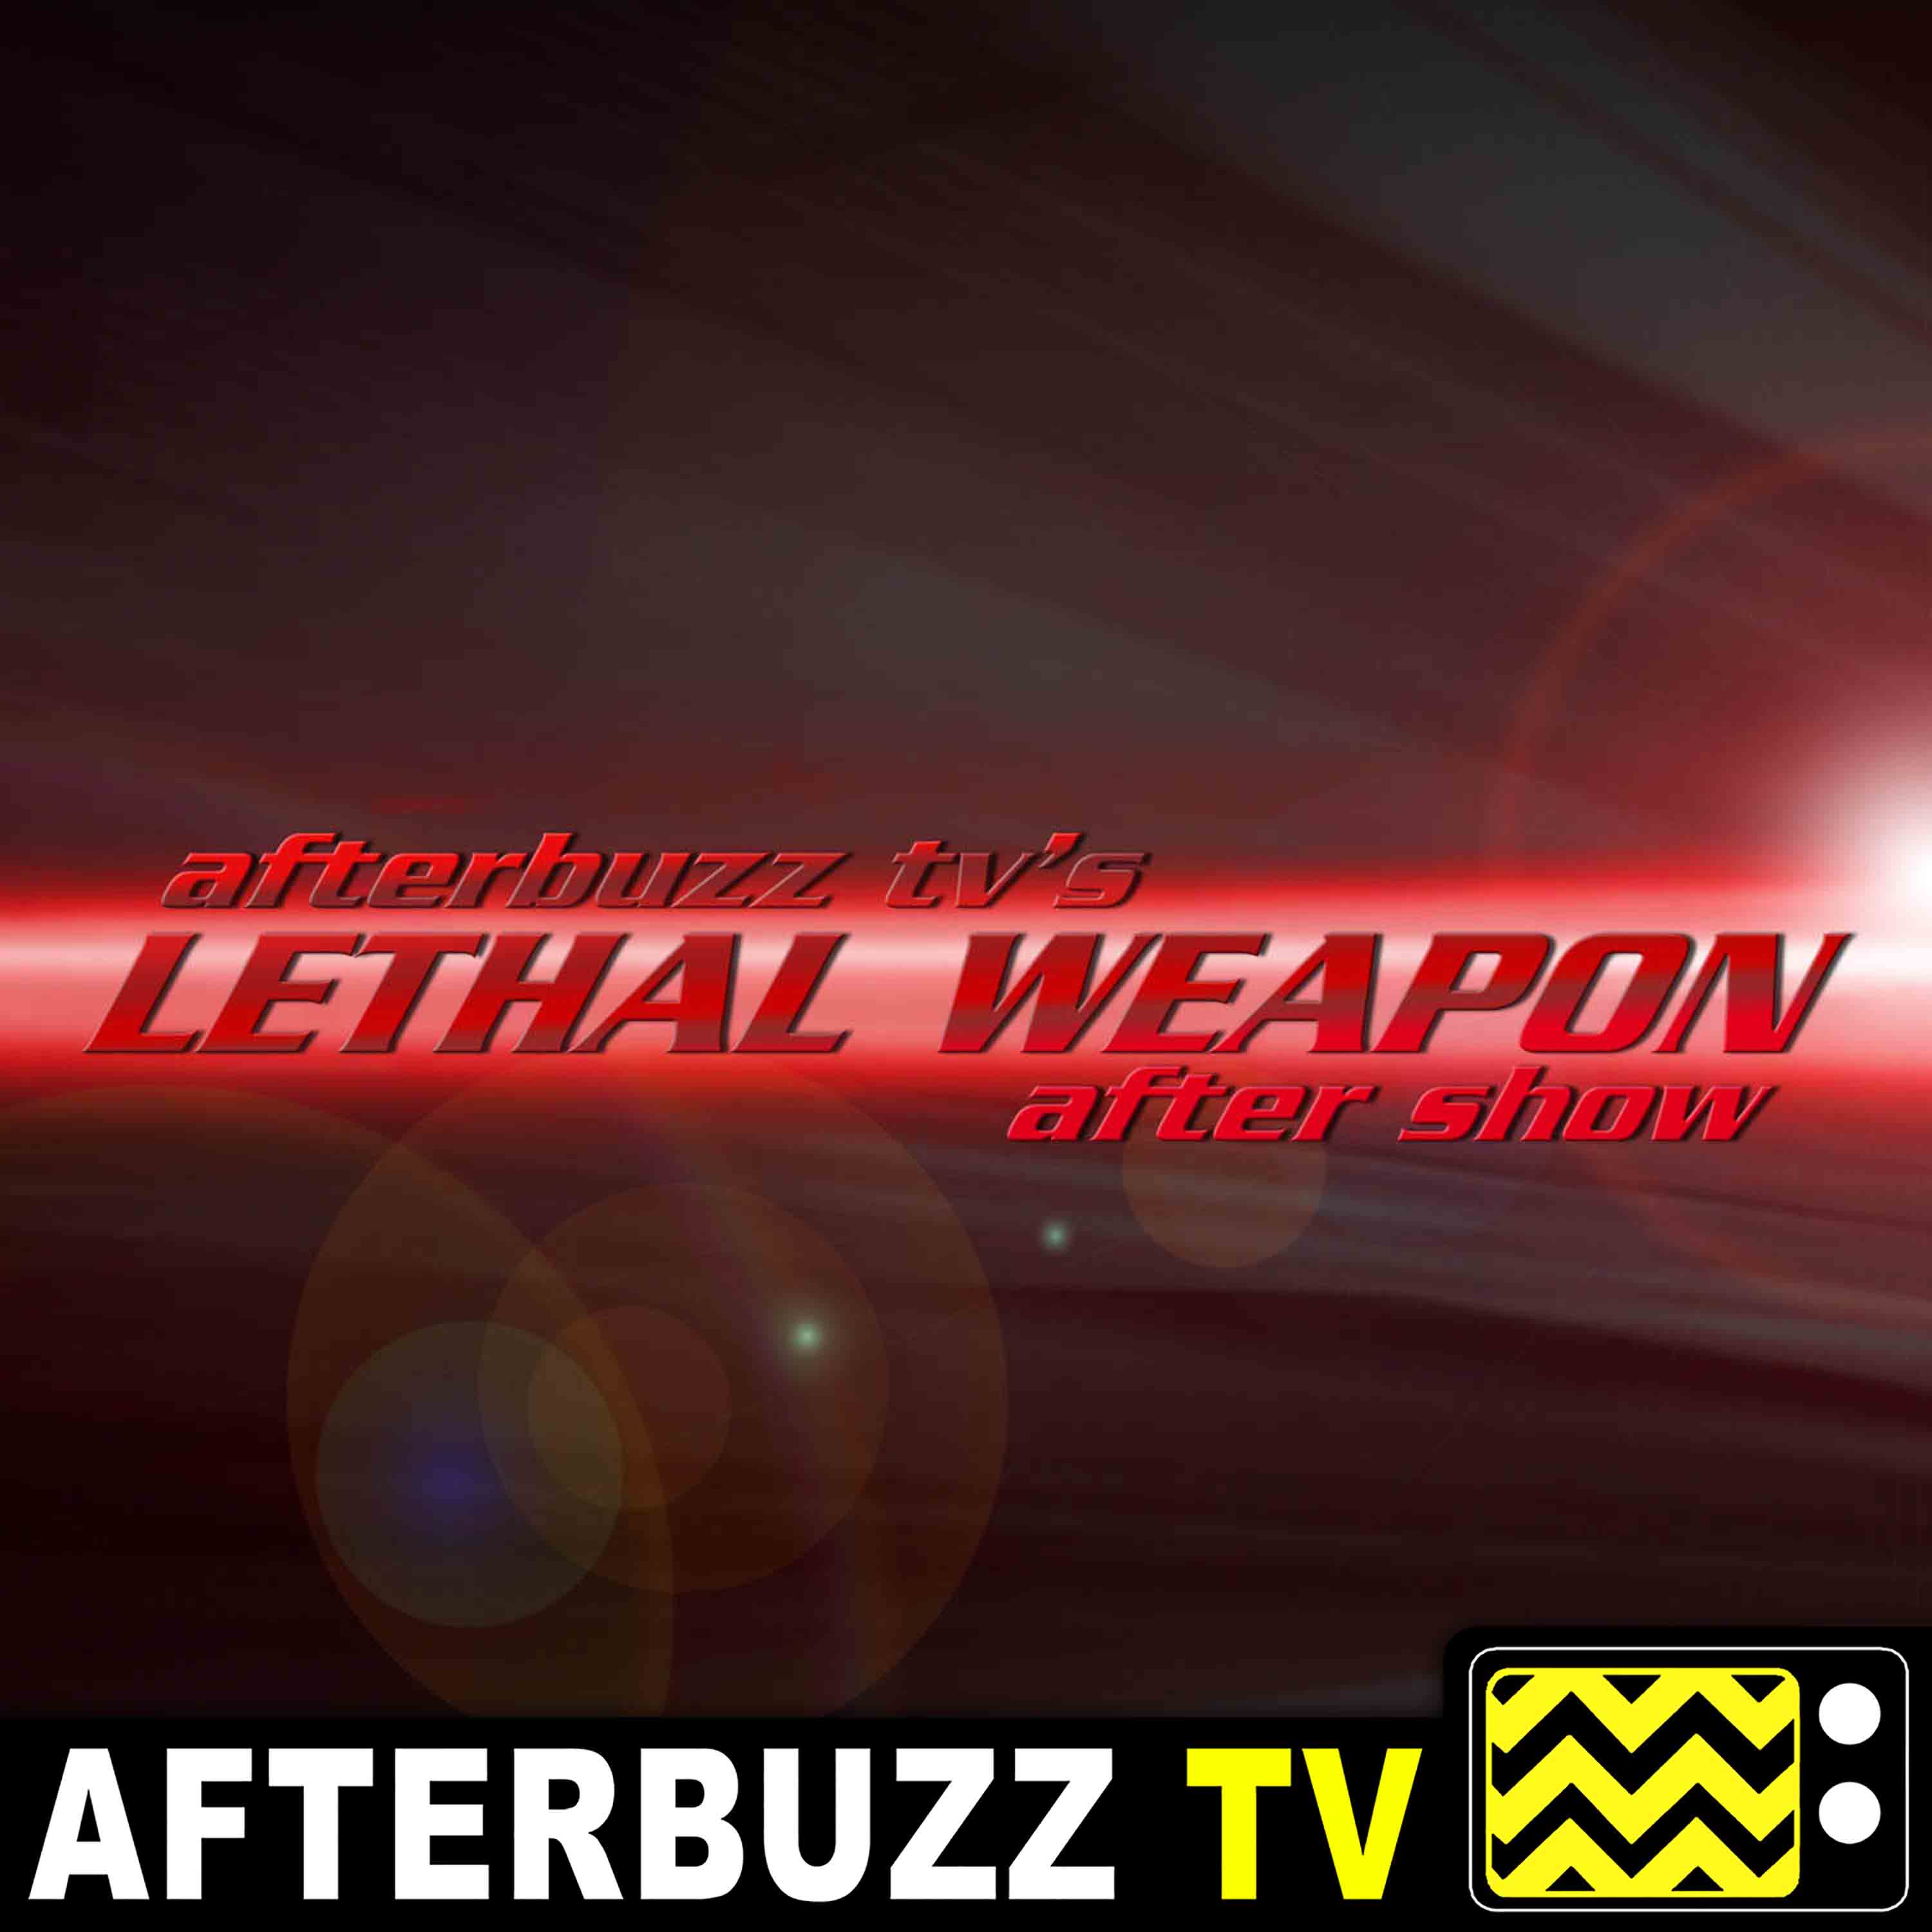 Lethal Weapon S:2 | The Odd Couple E:17 | AfterBuzz TV AfterShow